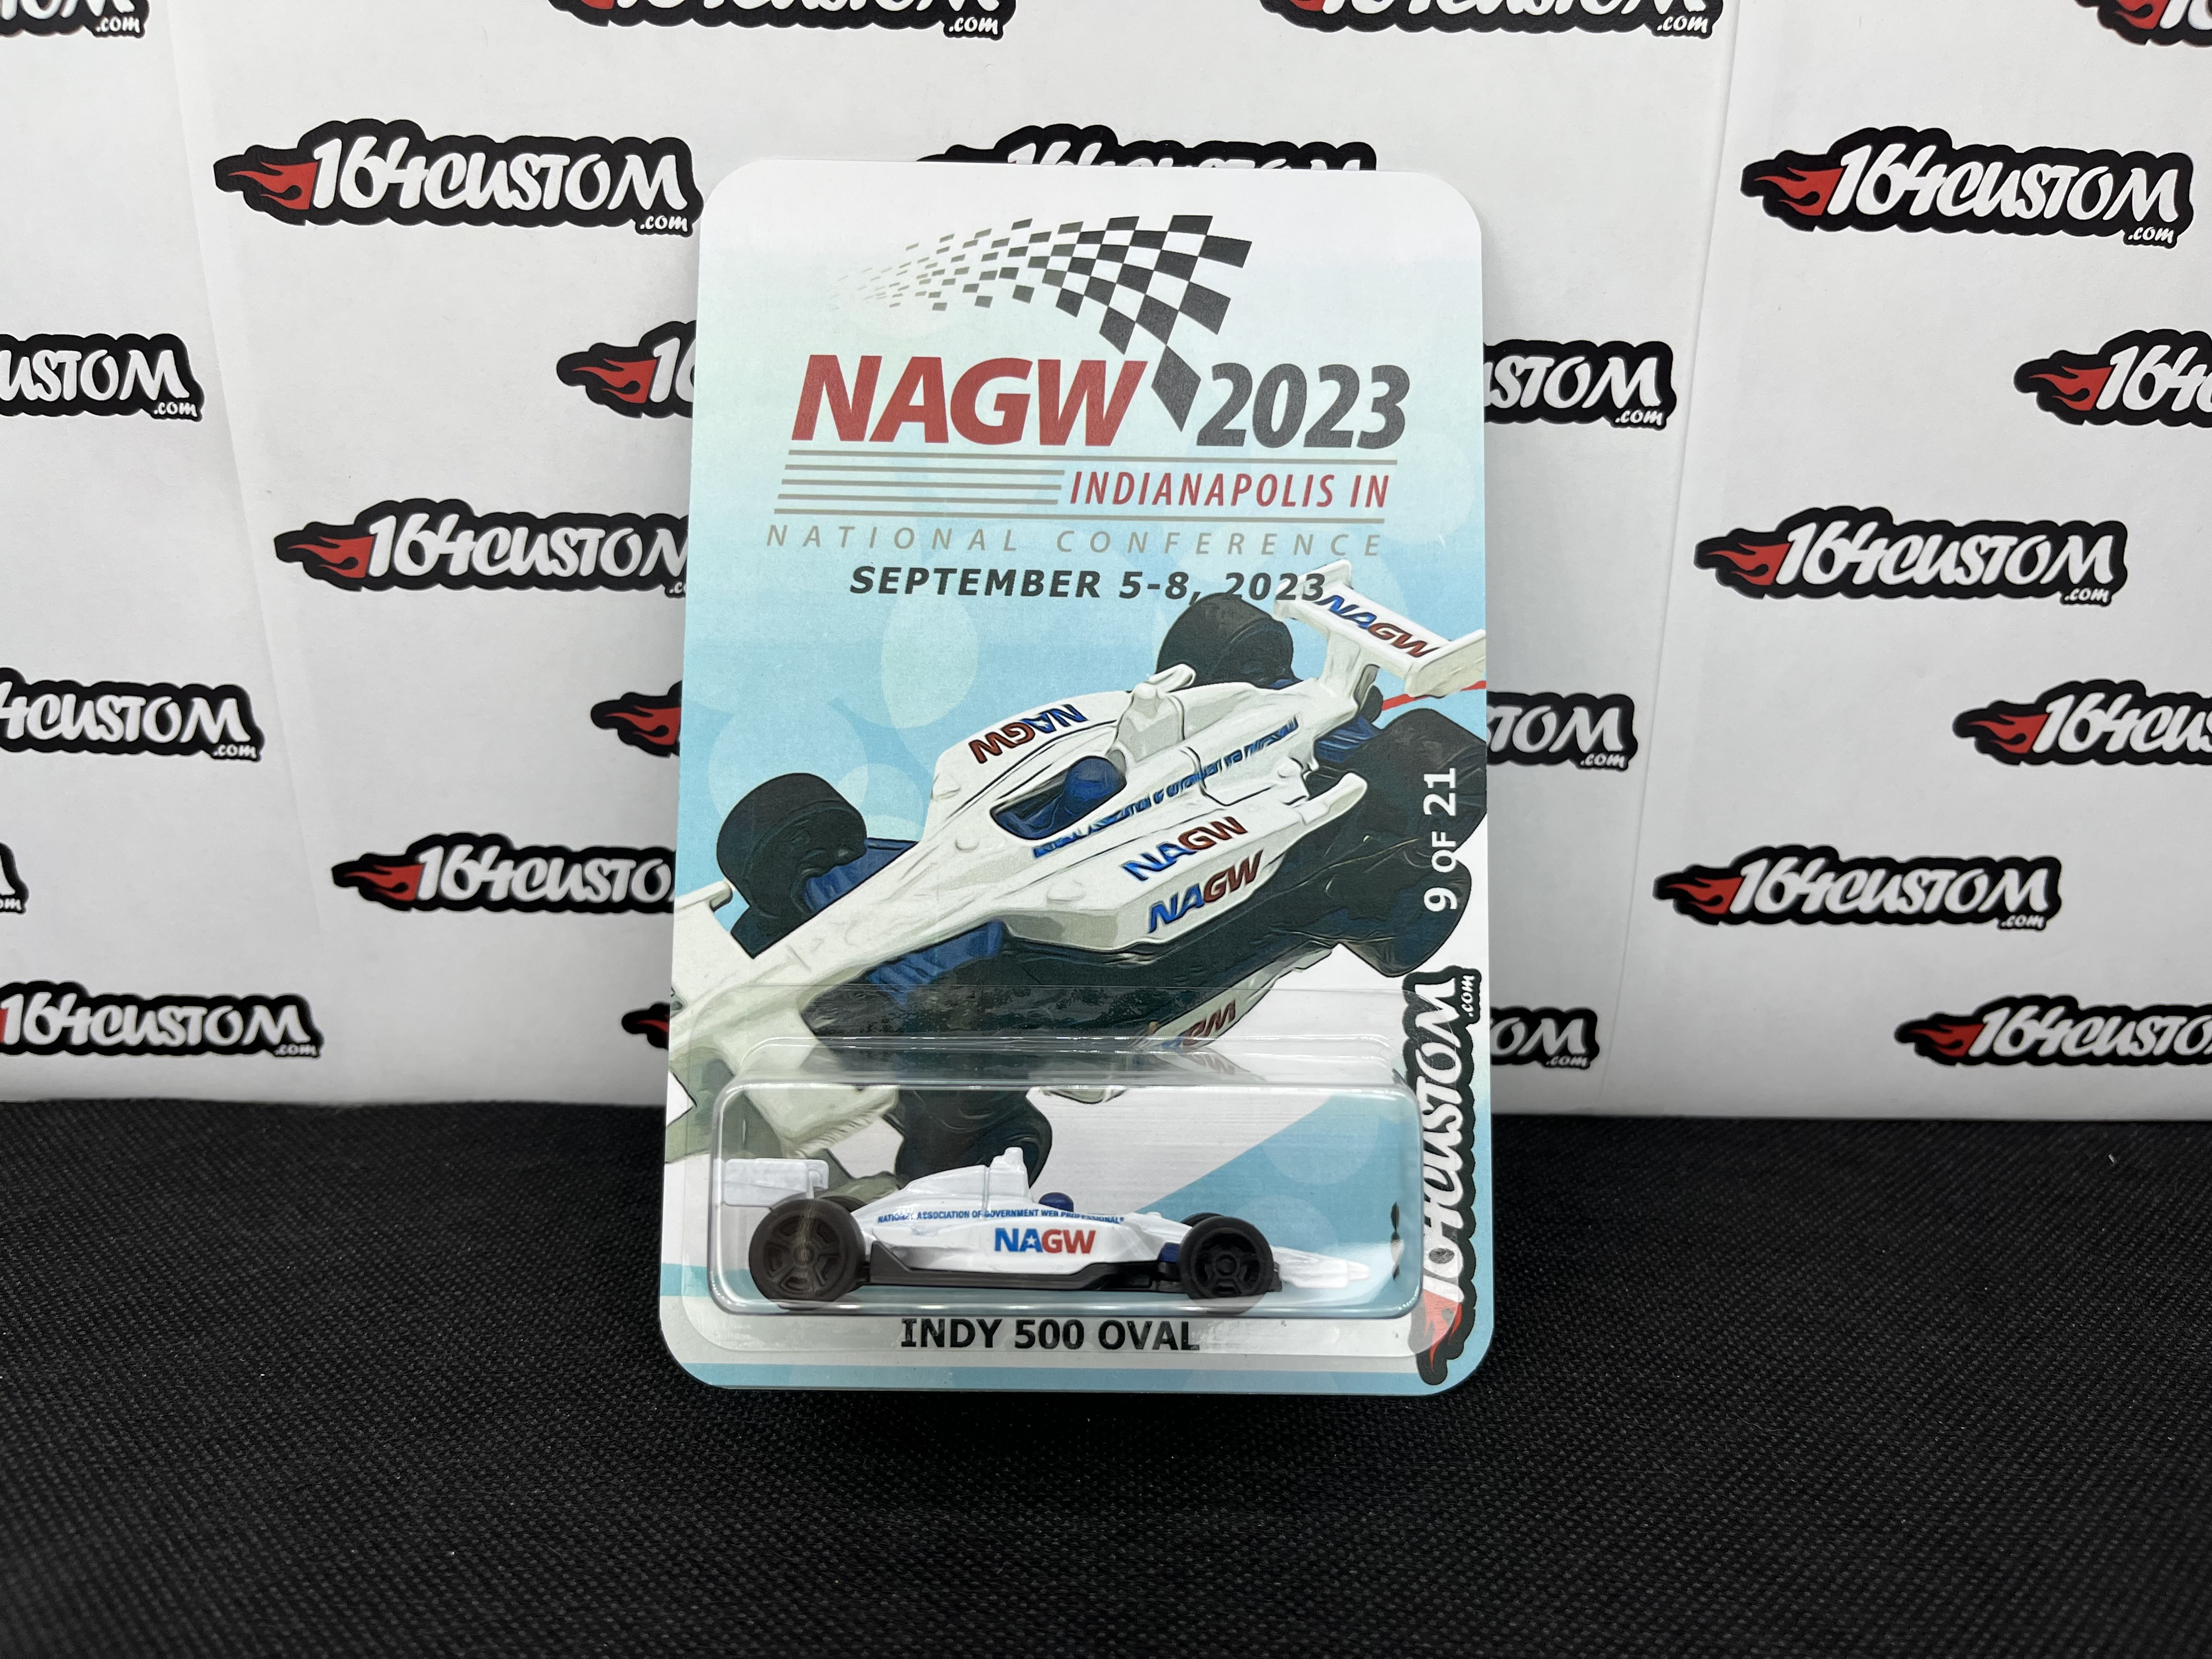 Indy 500 Oval - 9 of 21 Hot Wheels